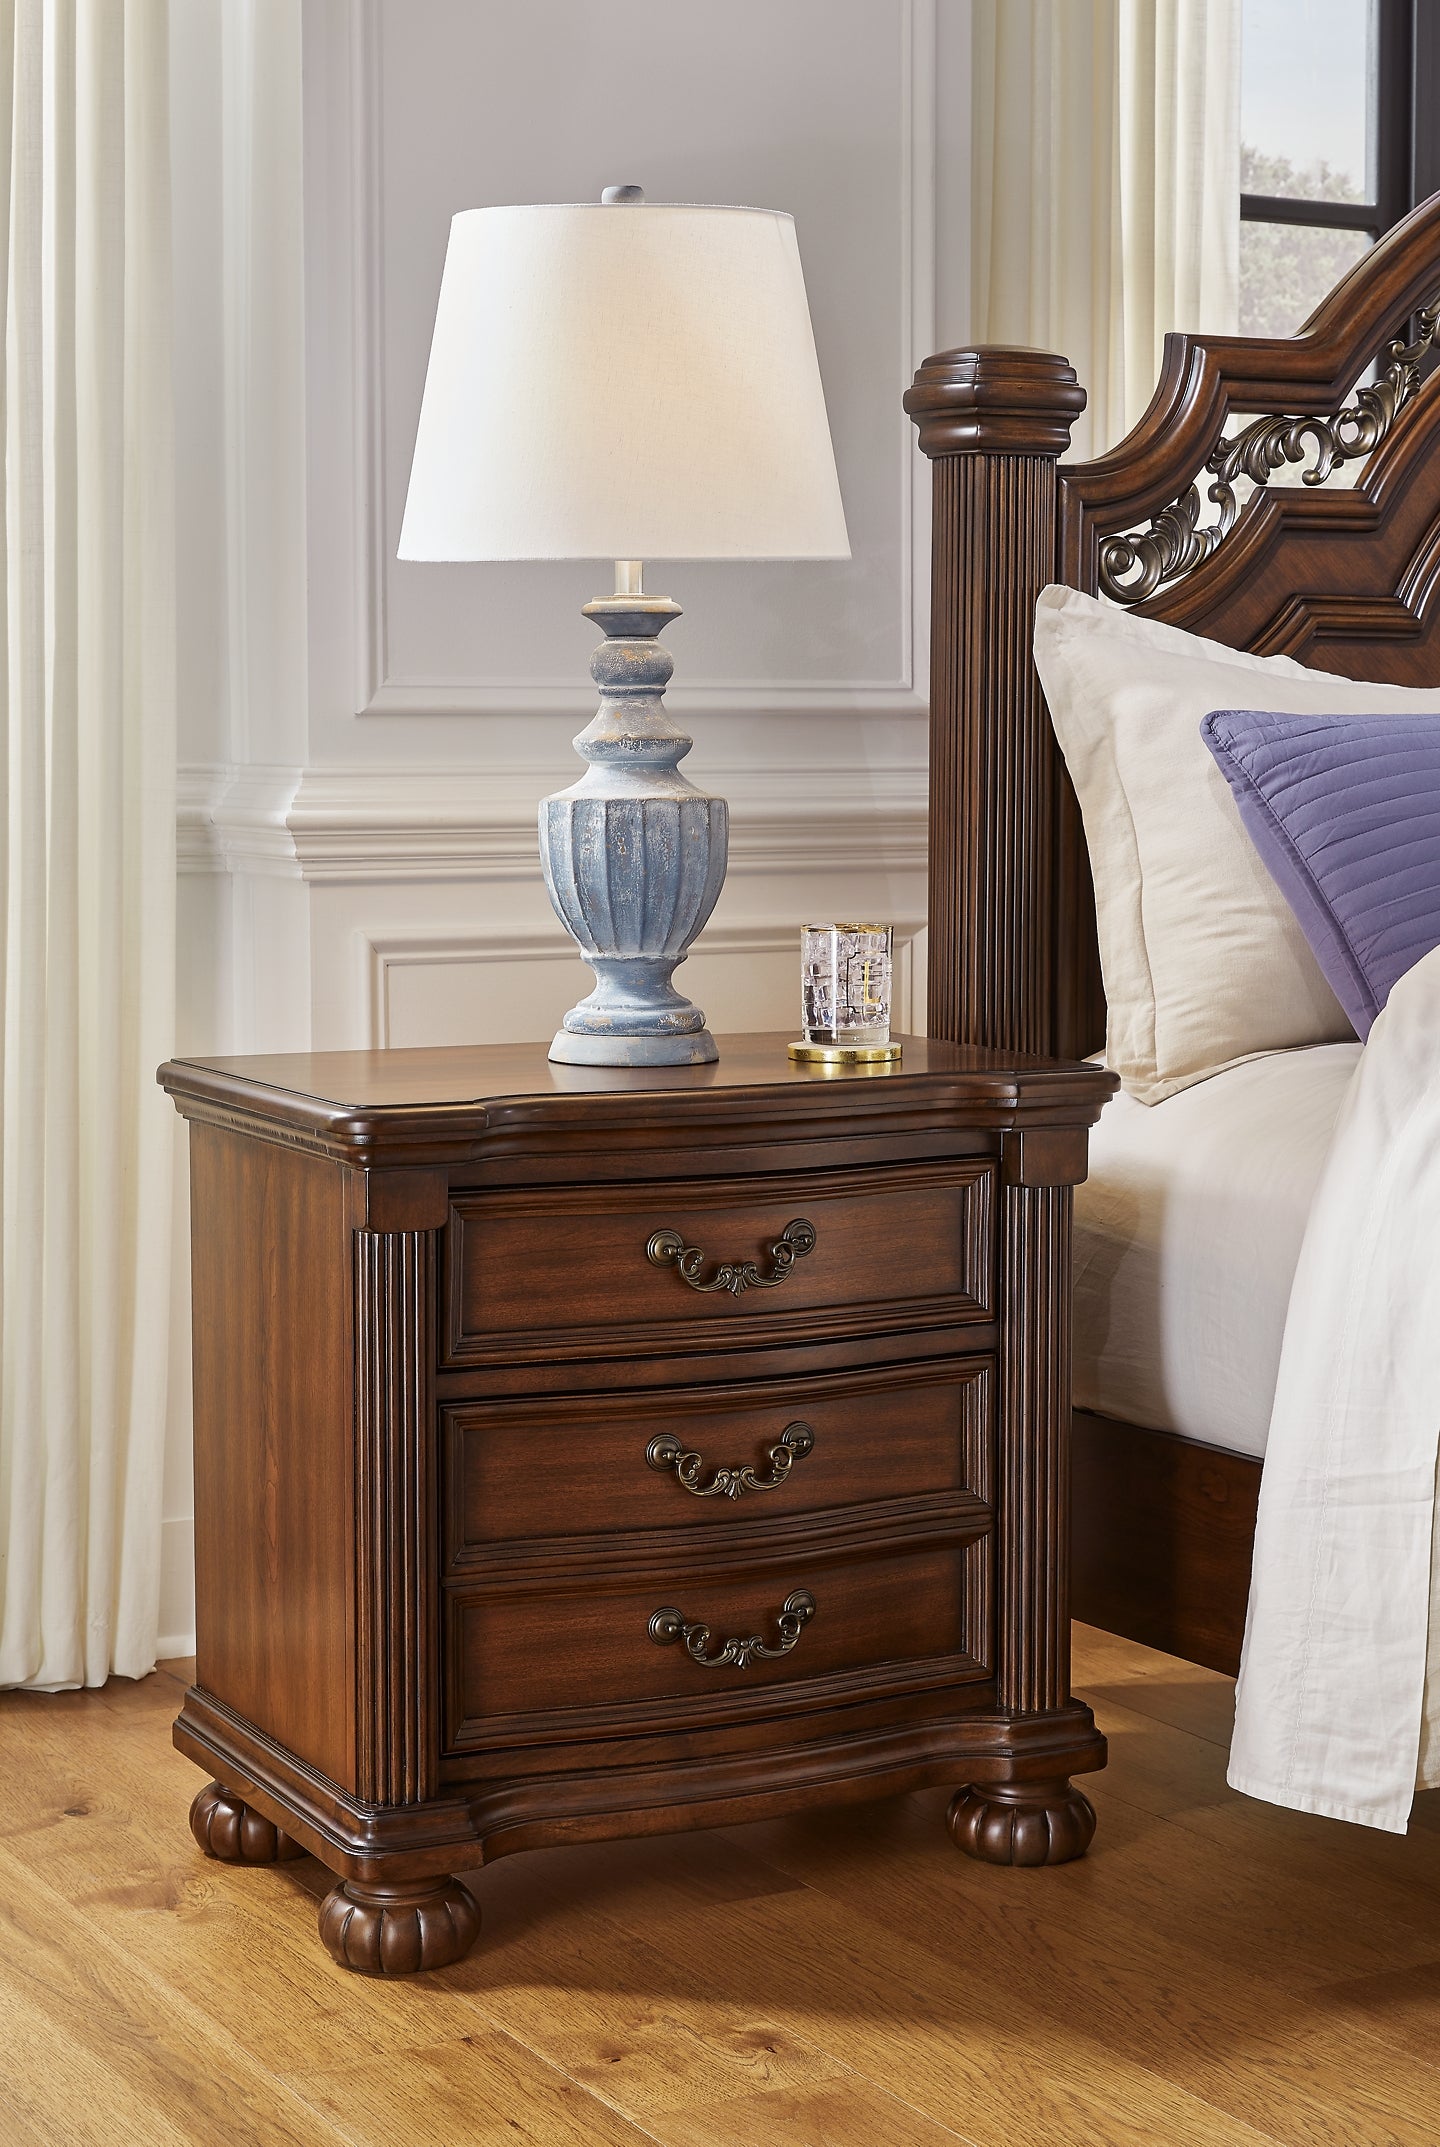 Lavinton King Panel Bed with Dresser and Nightstand Signature Design by Ashley®